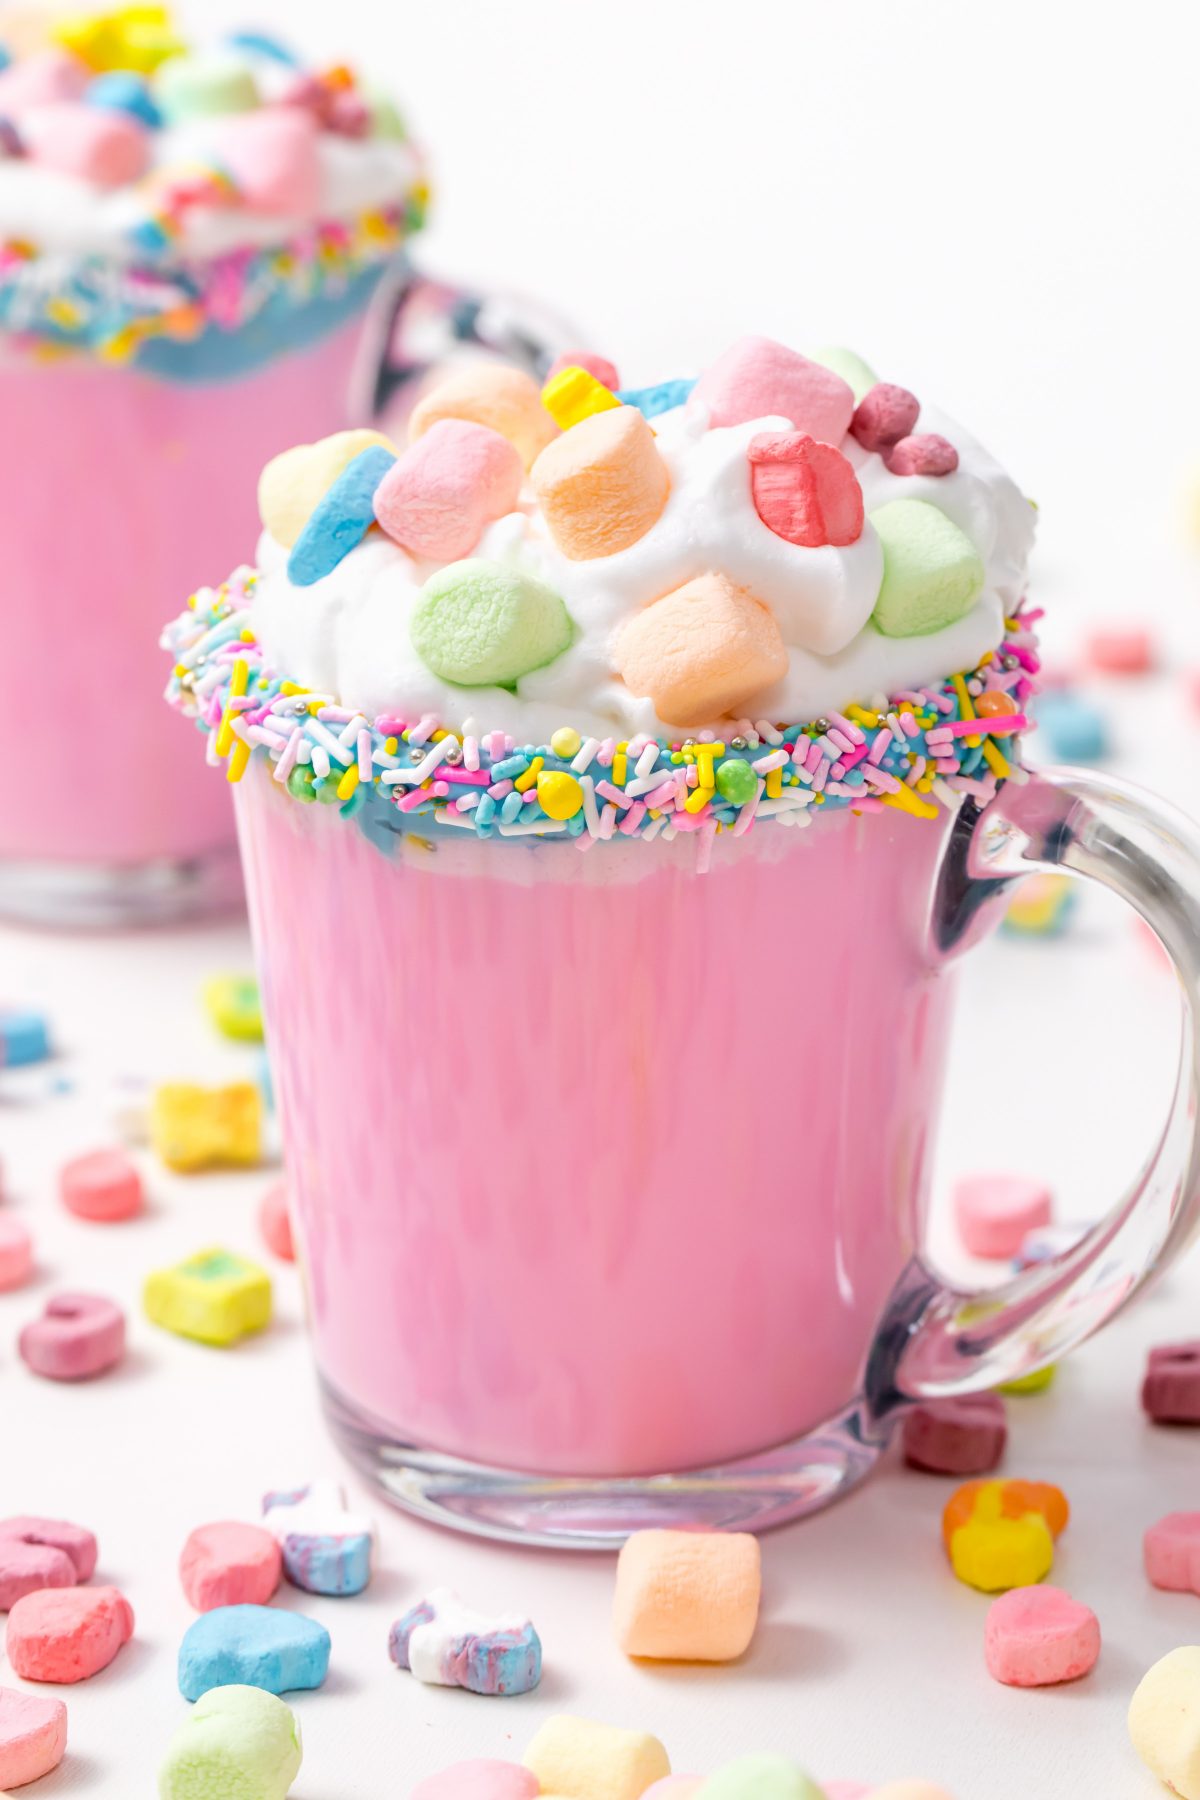 https://www.makeitgrateful.com/wp-content/uploads/2018/09/5D4B3142-Unicorn-Hot-Chocolate-pink-hot-chocolate-with-whipping-cream-lucky-charms-marshmellows-on-a-white-table-1200x1800.jpg